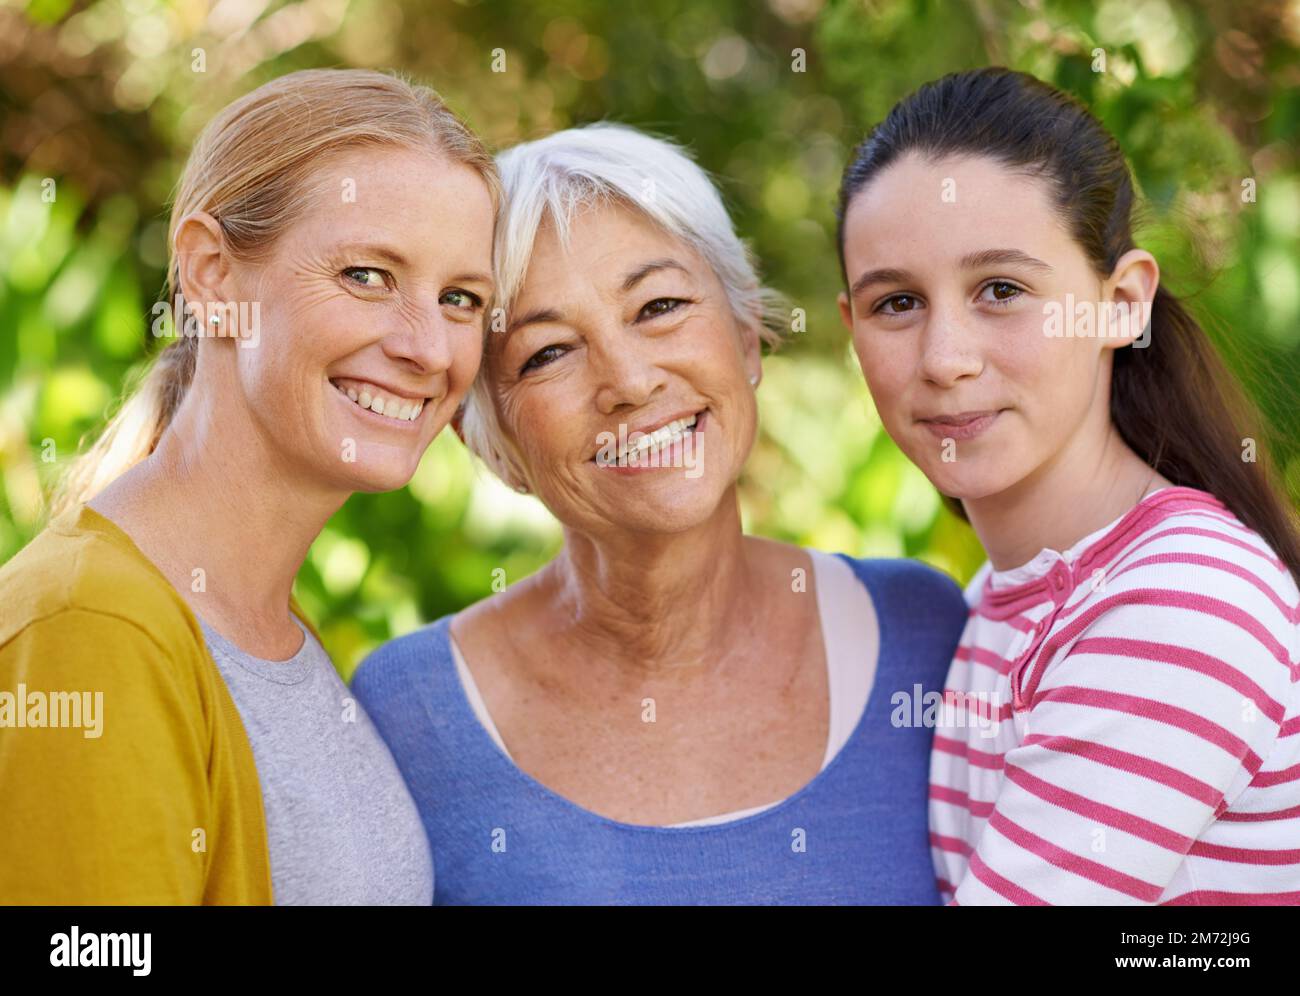 The strongest of family bonds. three generations of family women standing outdoors. Stock Photo